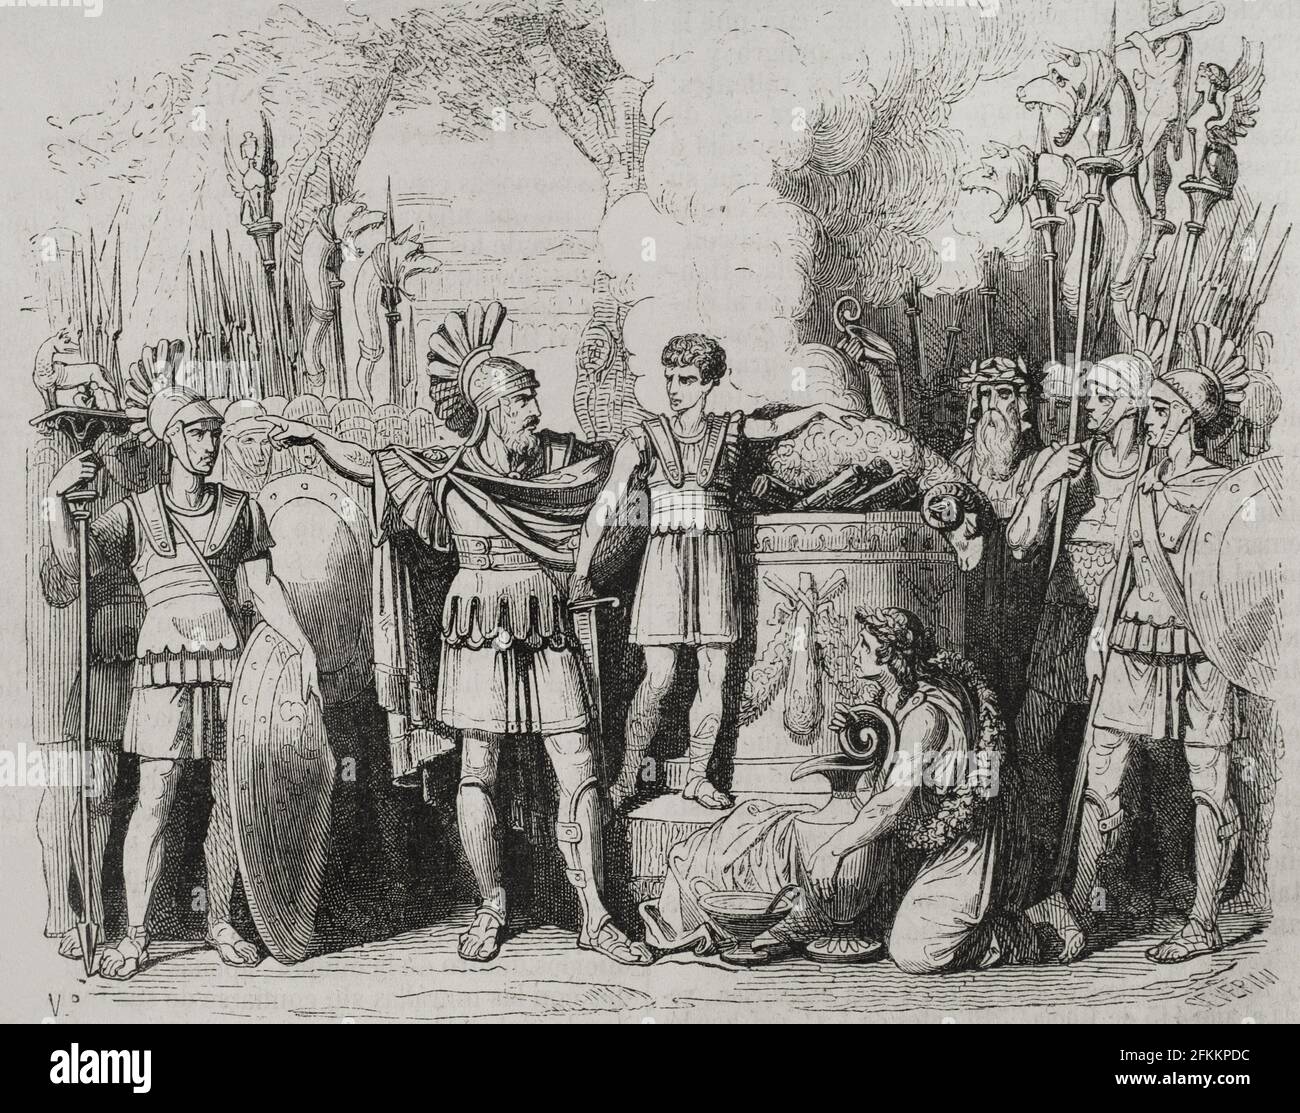 Hannibal Barca (247-183 BC). Carthaginian general and statesman. Hannibal in the Temple of Carthage with his father Hamilcar Barca, at the age of nine, taking an oath of eternal hatred of Rome by dipping his hands in the blood of the sacrificed animal. Engraving by Severini. Historia General de España by Father Mariana. Madrid, 1852. Stock Photo